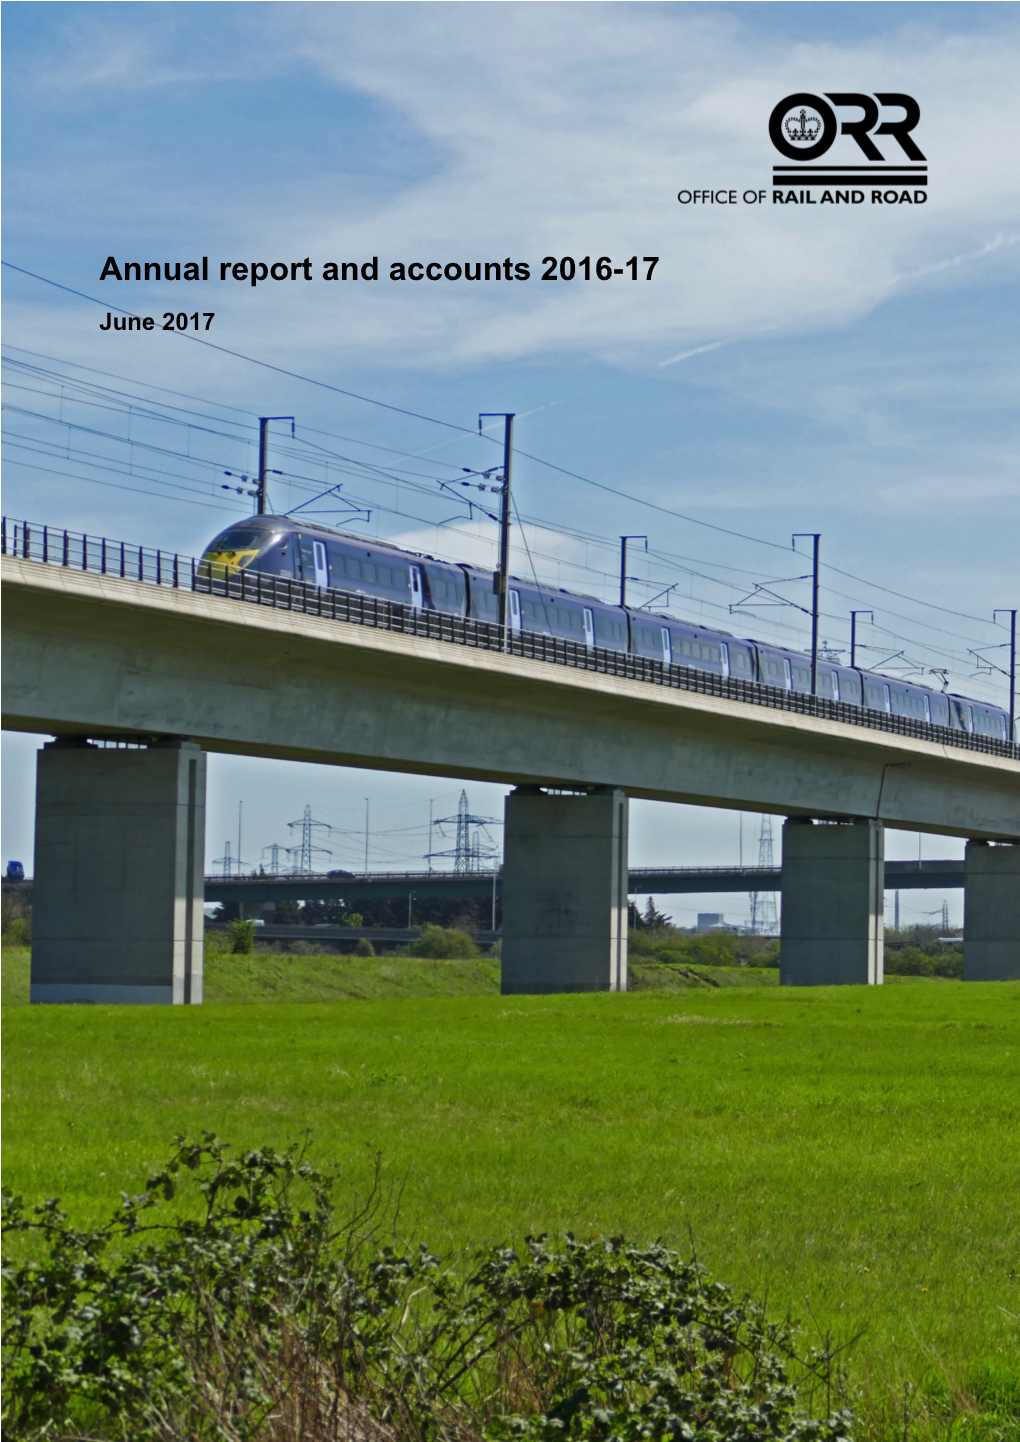 Office of Rail and Road Annual Report and Accounts 2016-17